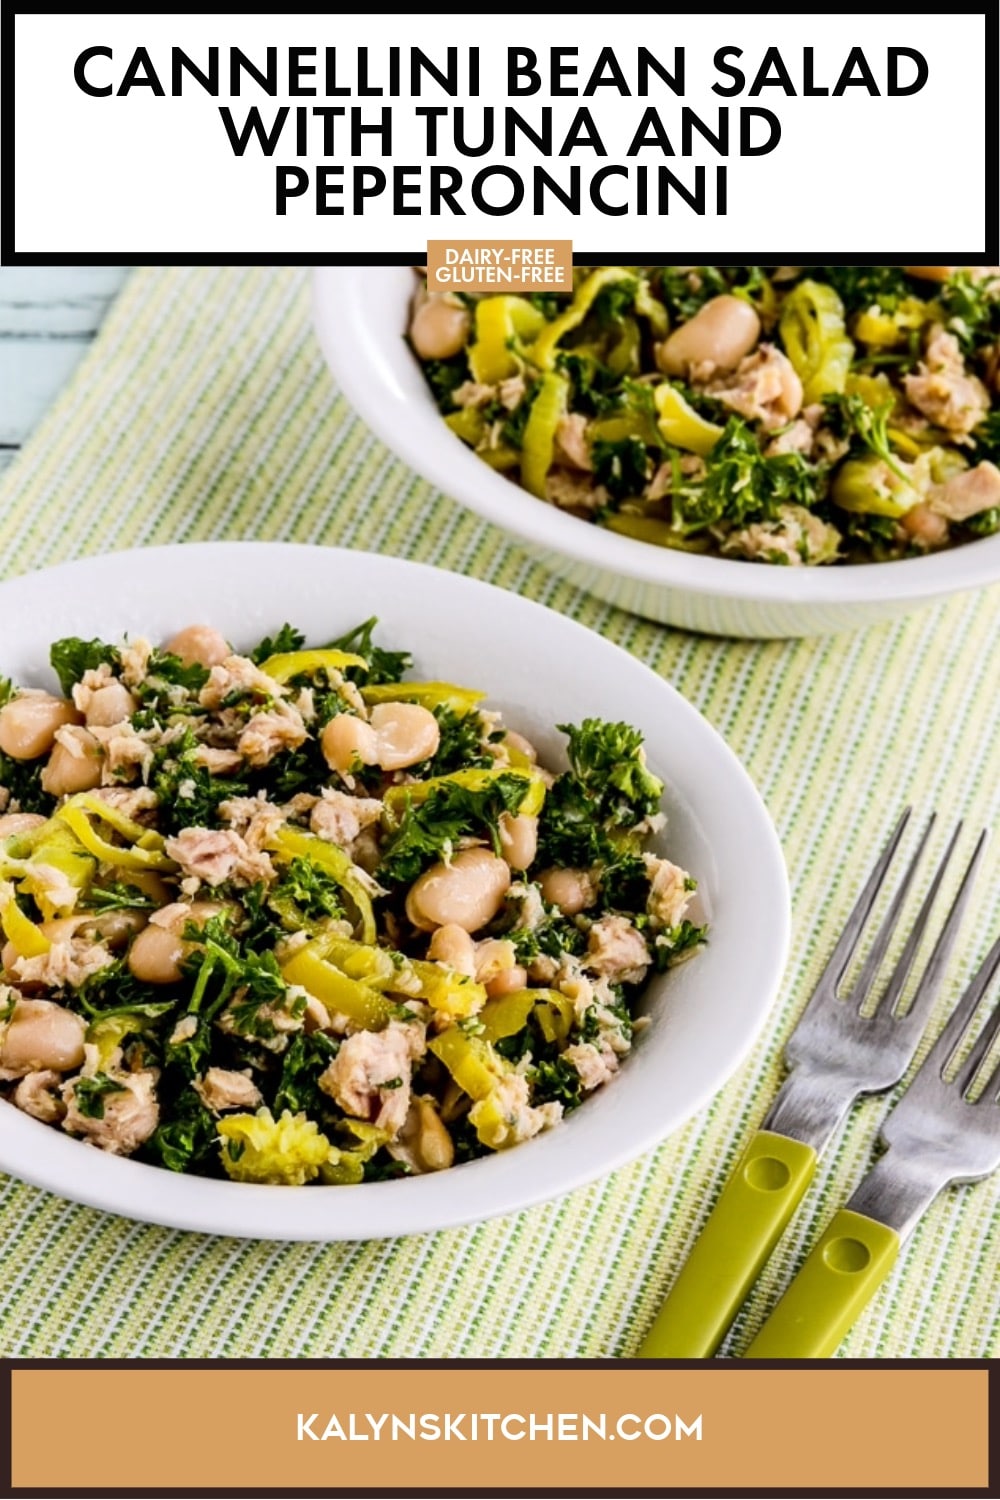 Pinterest image of Cannellini Bean Salad with Tuna and Peperoncini